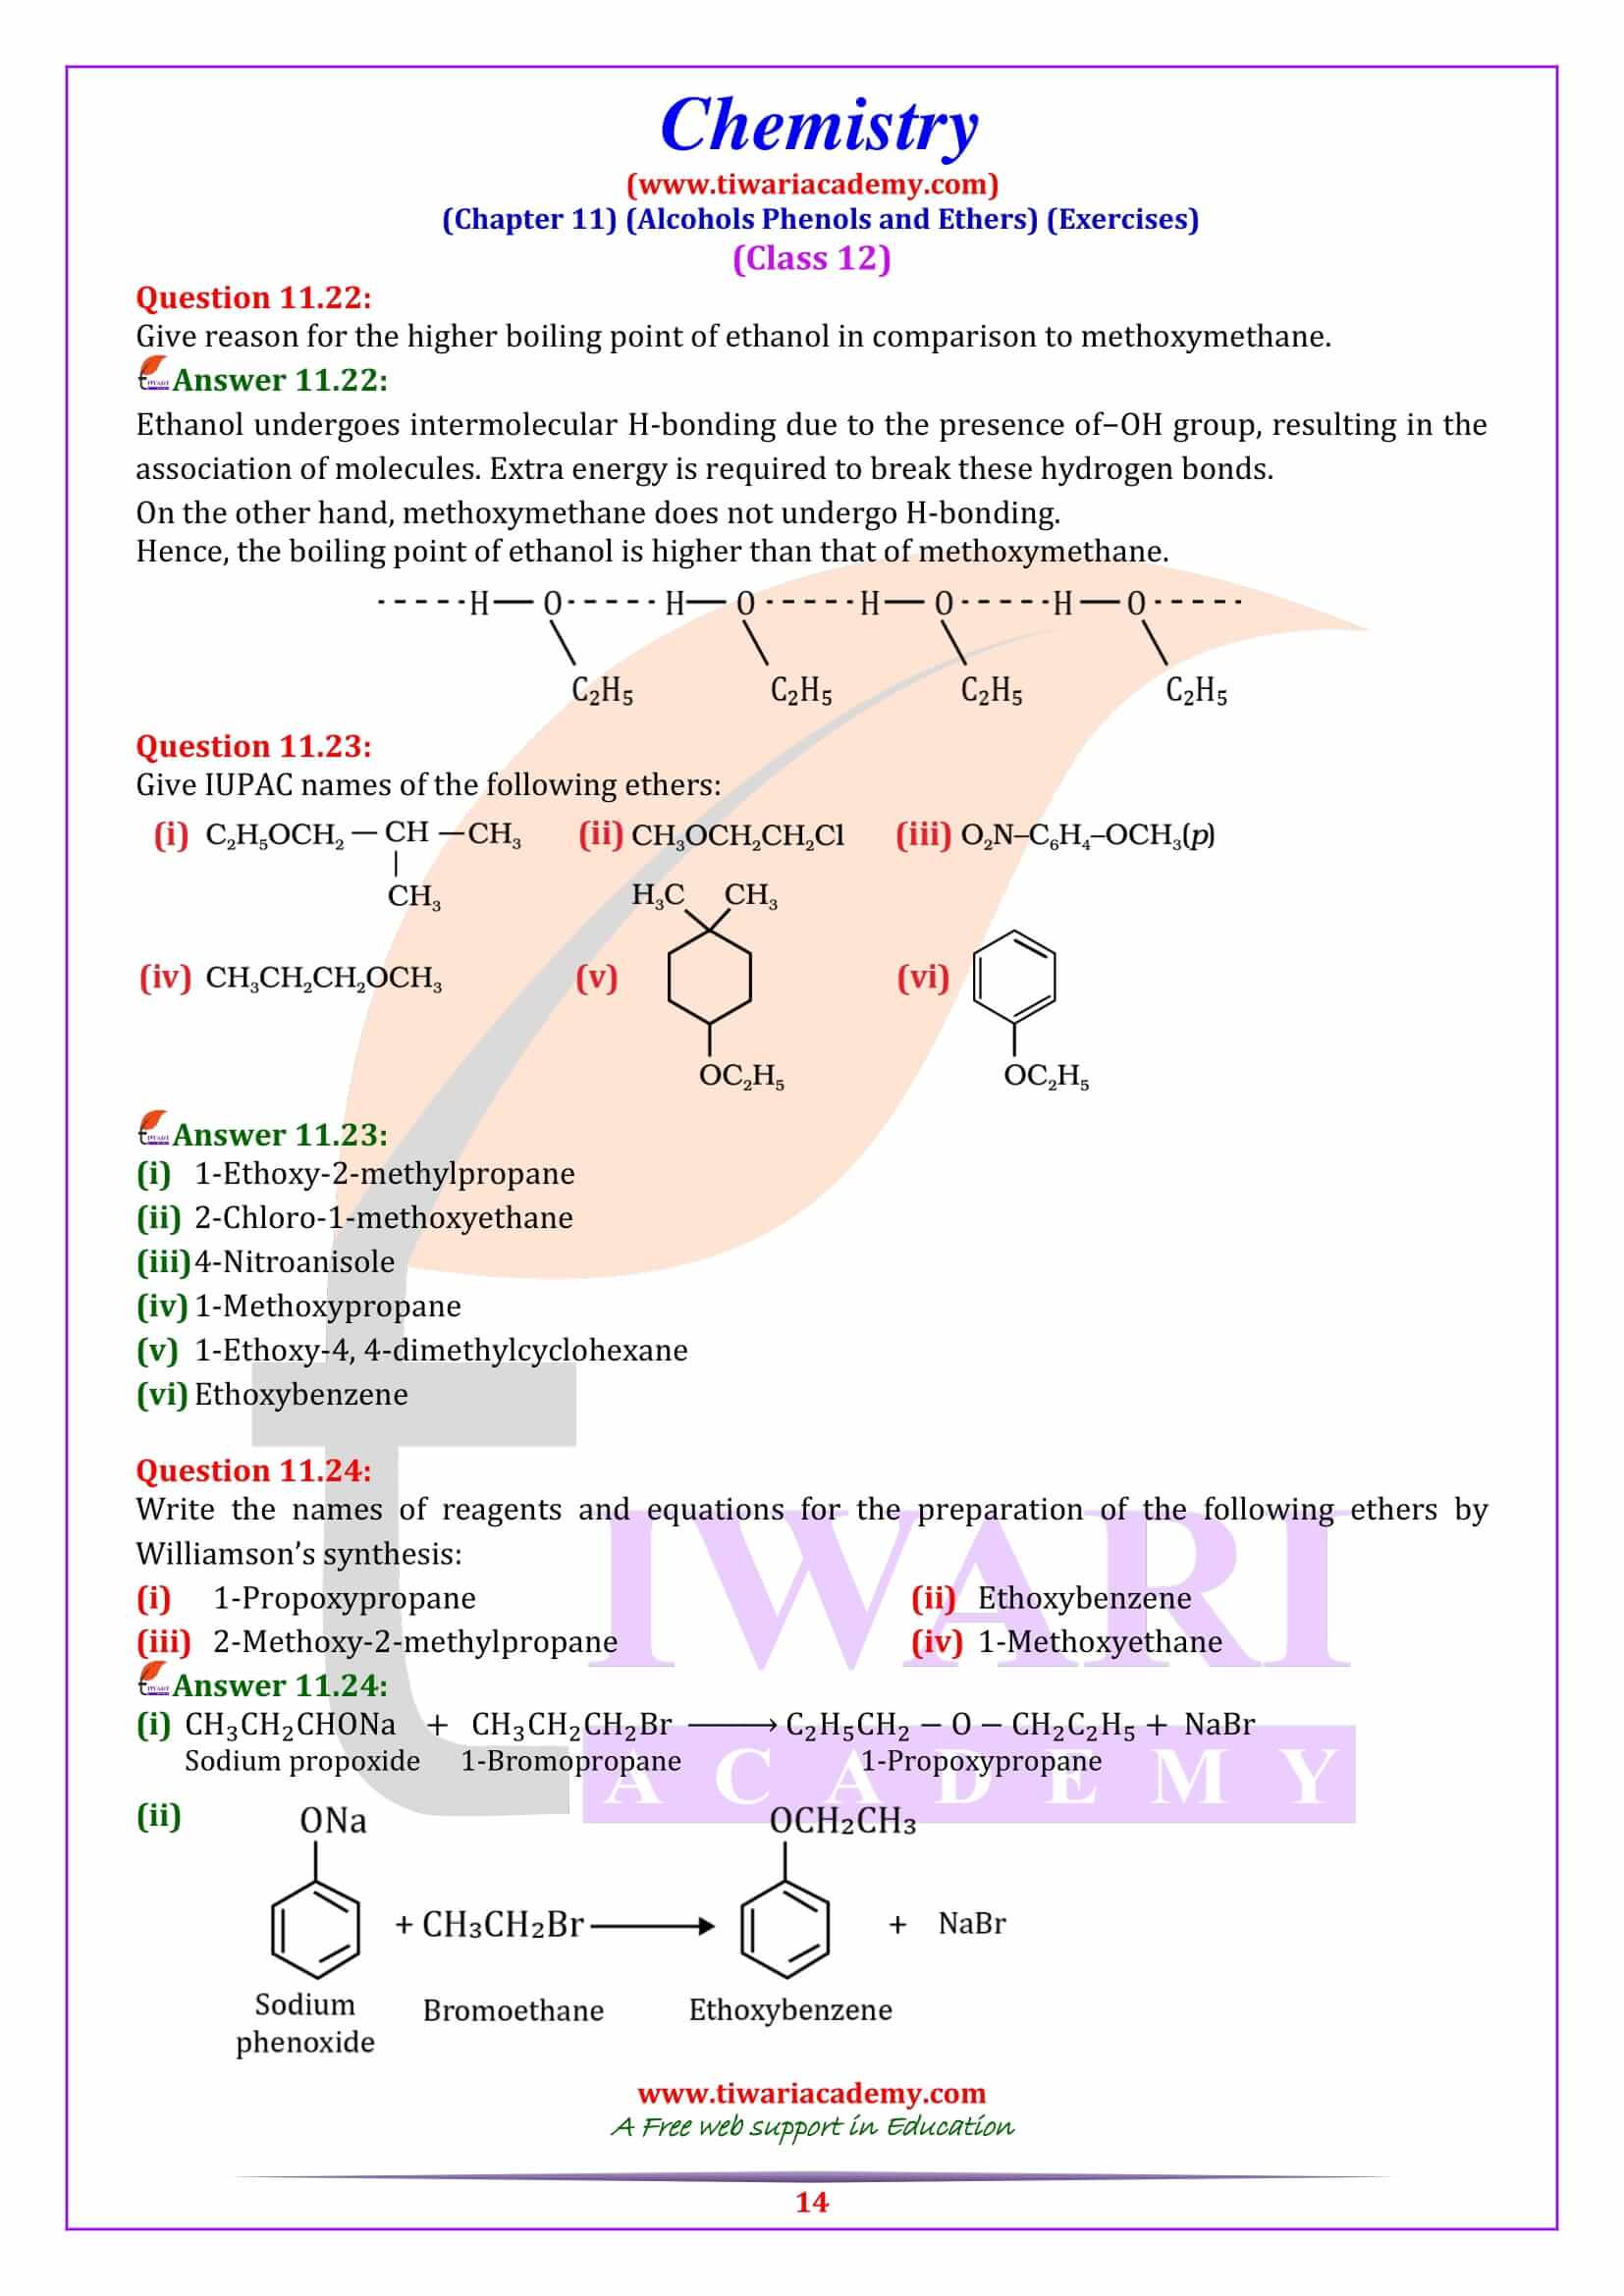 NCERT Solutions for Class 12 Chemistry Chapter 11 free guide